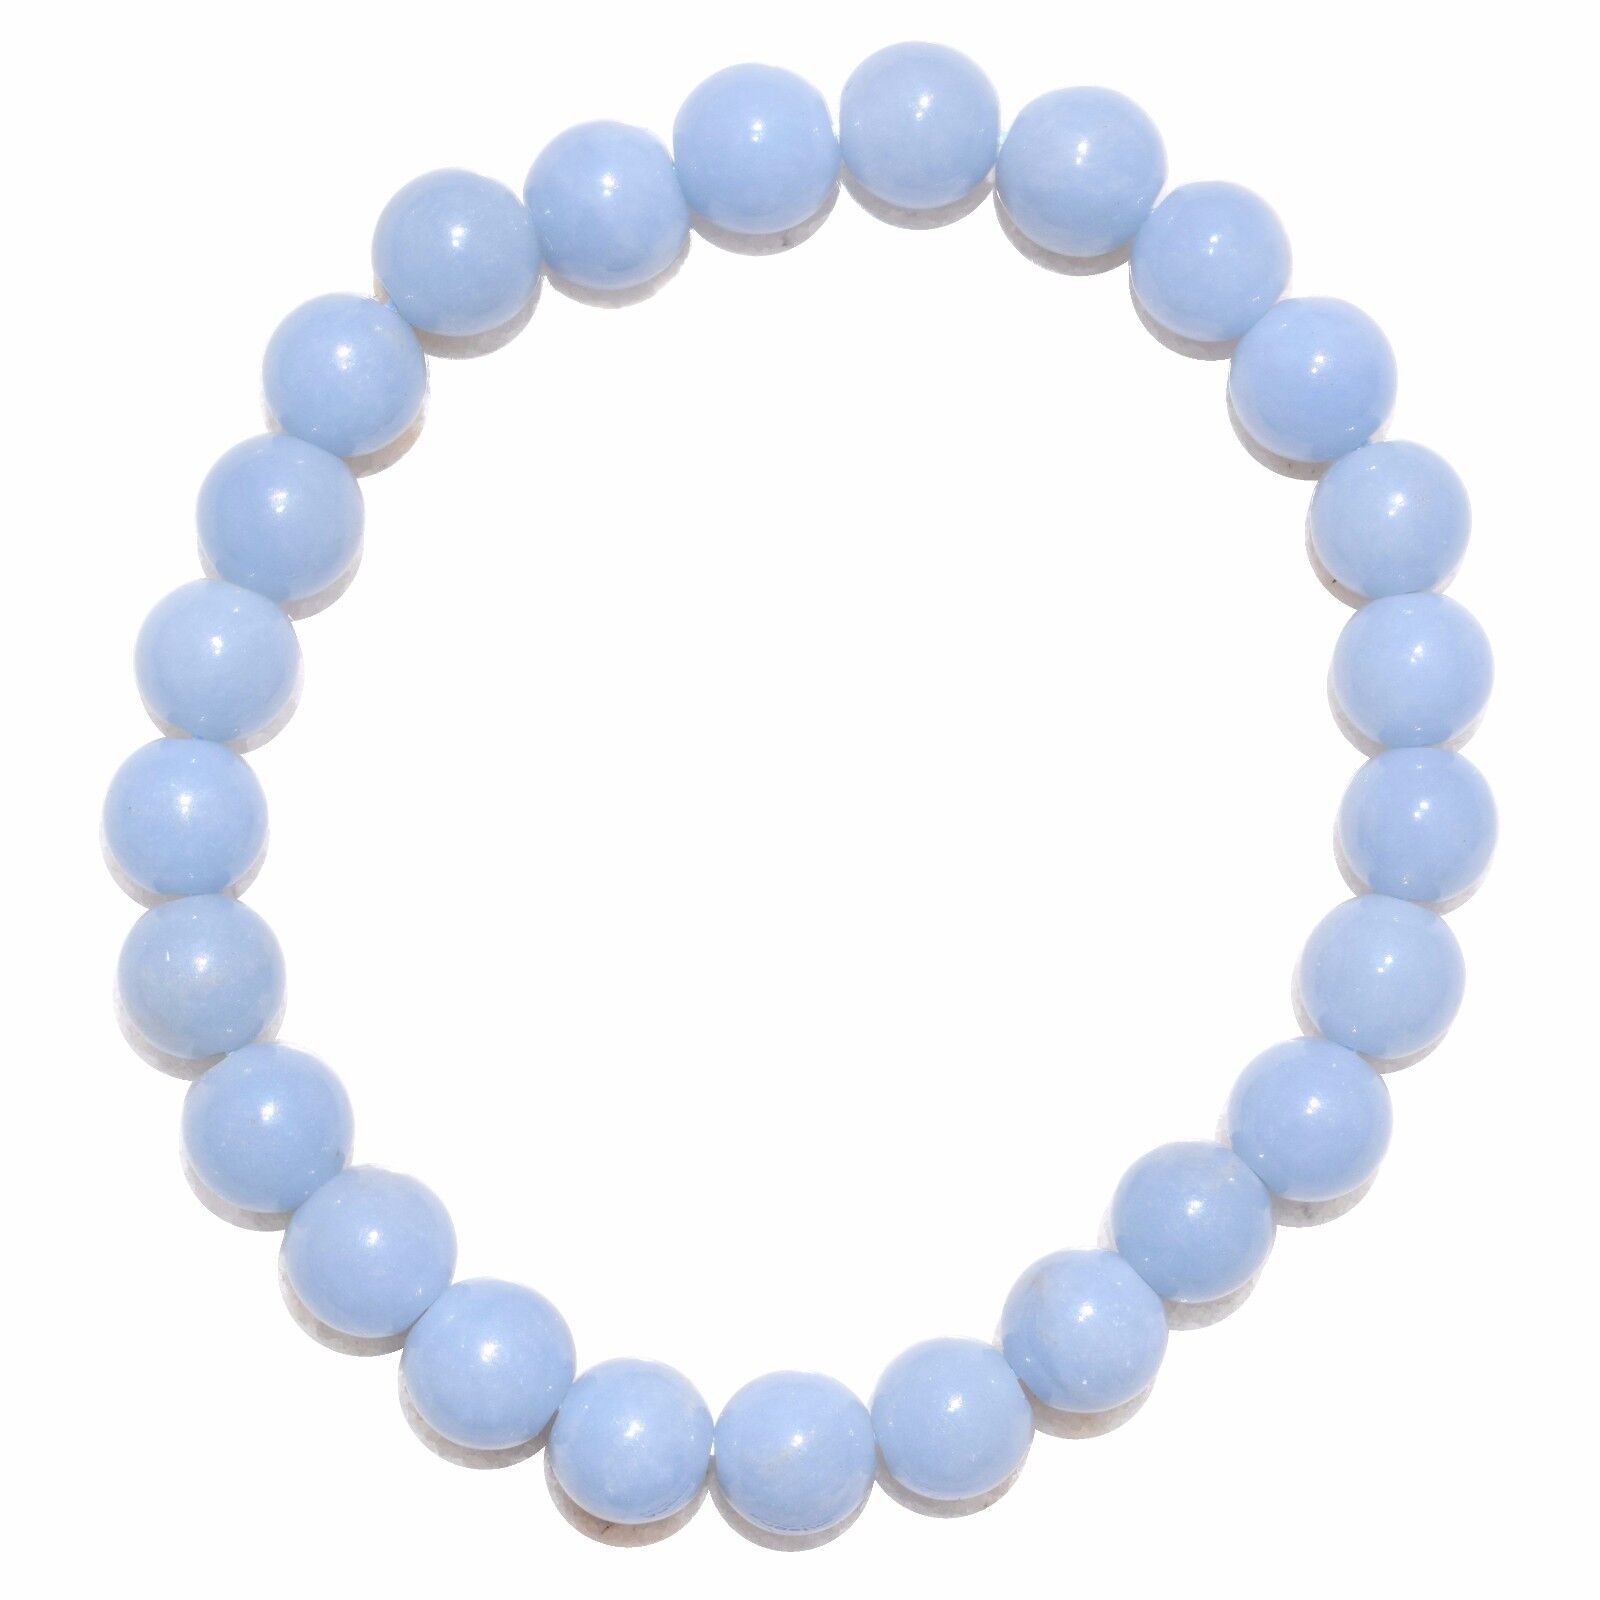 CHARGED Angelite Crystal 8mm Bead Stretchy Bracelet + Selenite Puffy Heart